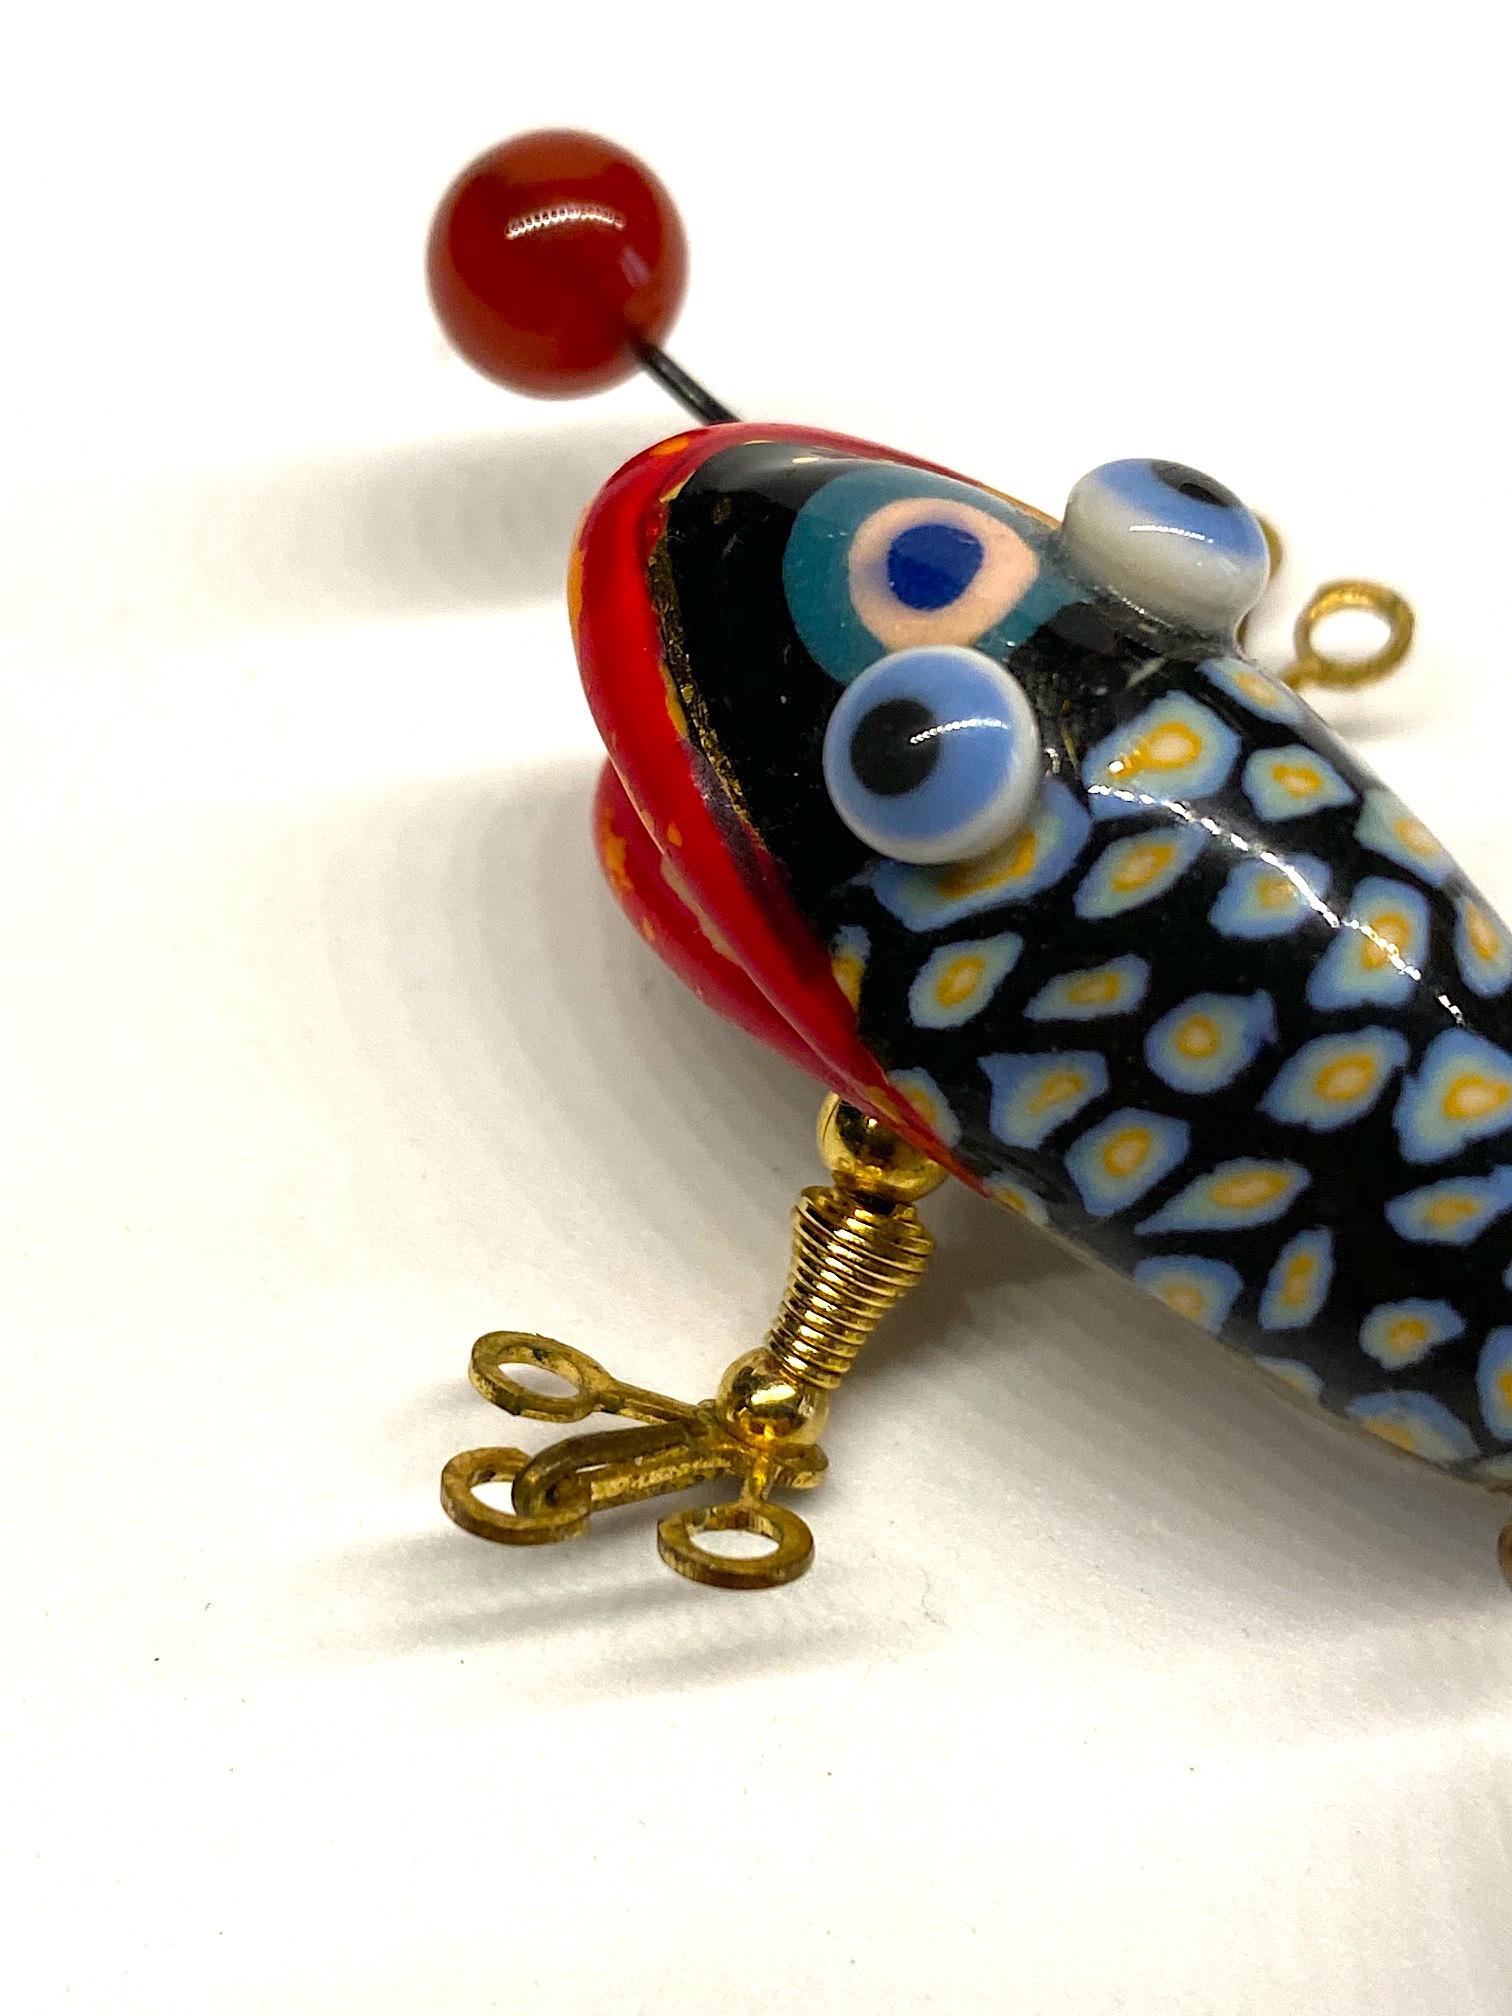 Cynthia Chuang, Jewelry 10, Porcelain & Glass Frog Brooch 1